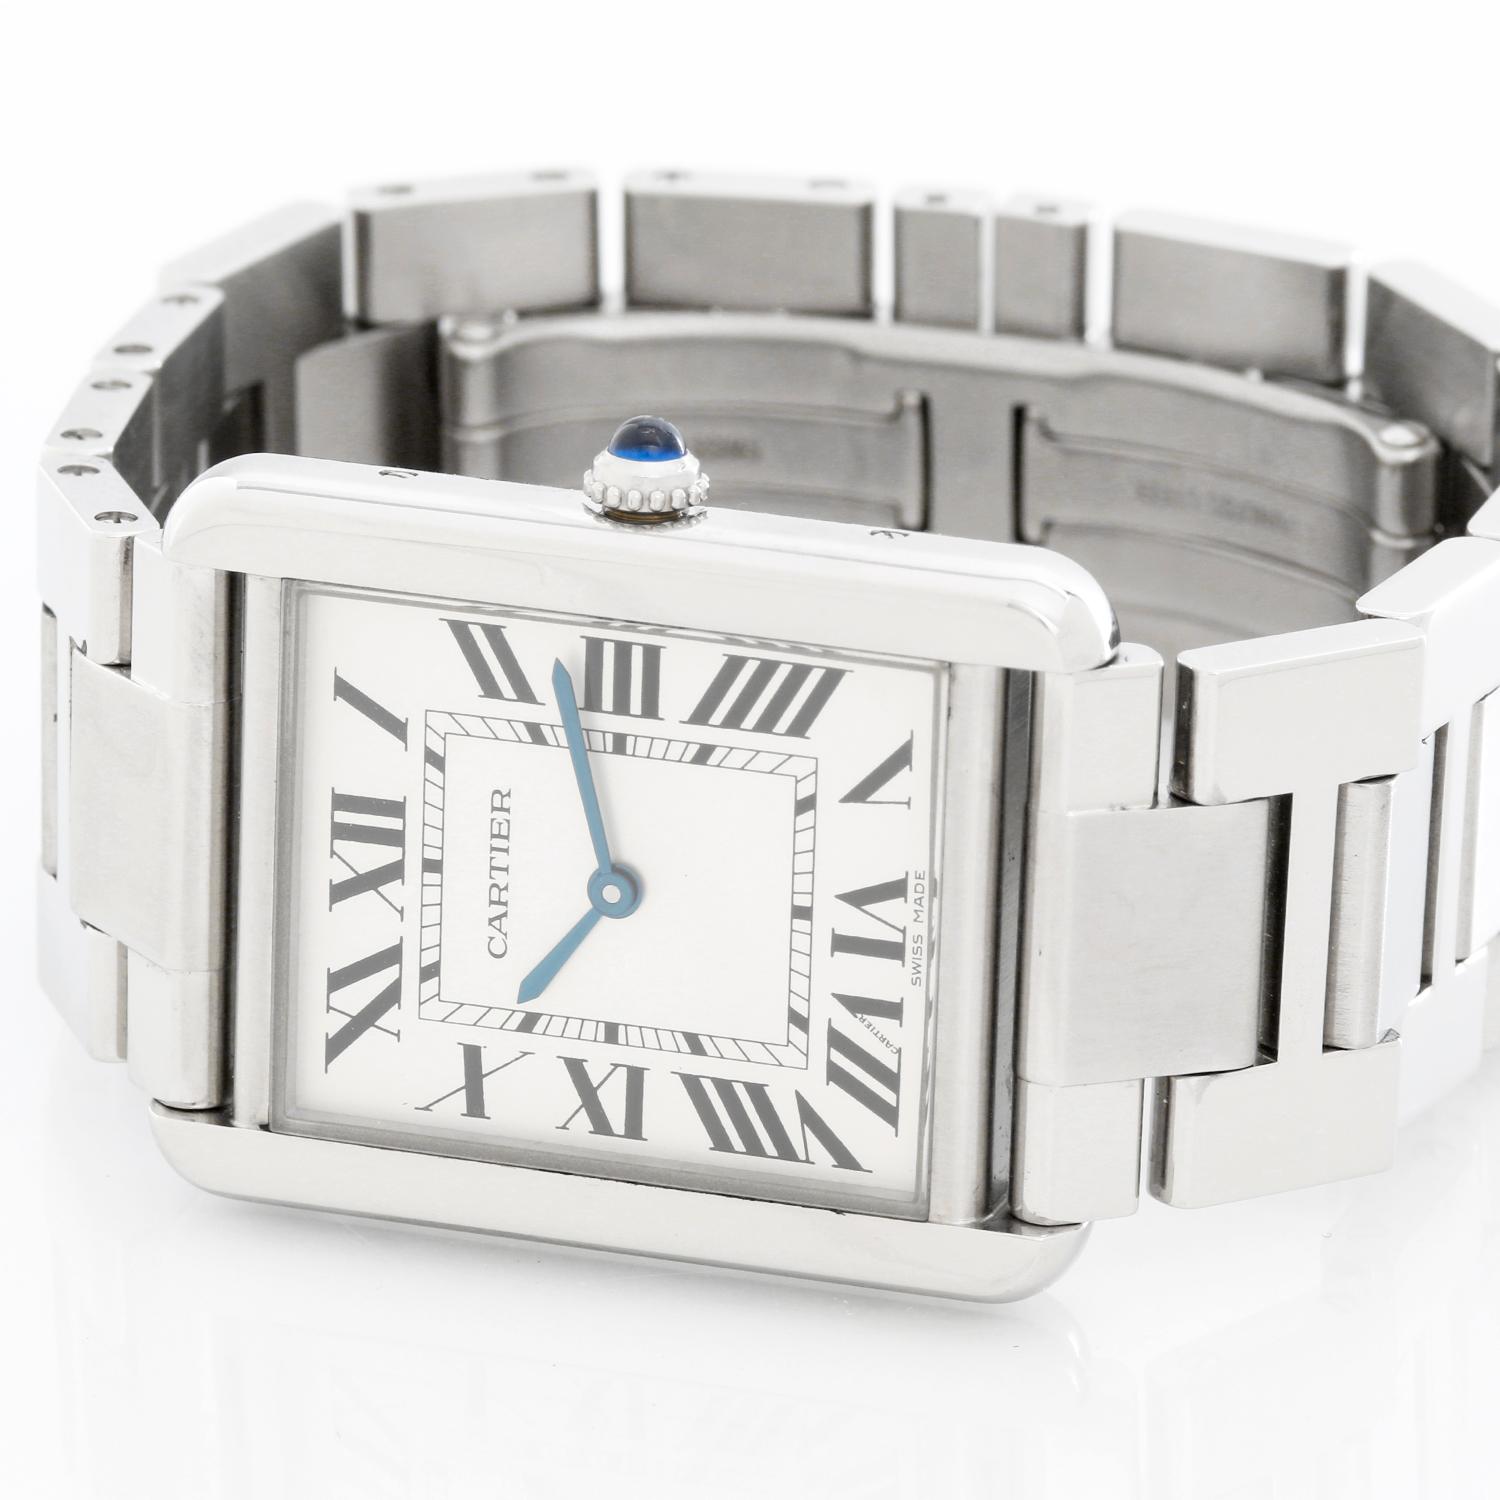 Men's Large Cartier Tank Solo Stainless Steel Watch W5200014 - Quartz. Stainless steel case (27mm x 35mm). Silver dial with black Roman numerals. Stainless steel bracelet (will fit apx. 6 inch wrist). Pre-owned with Cartier box .